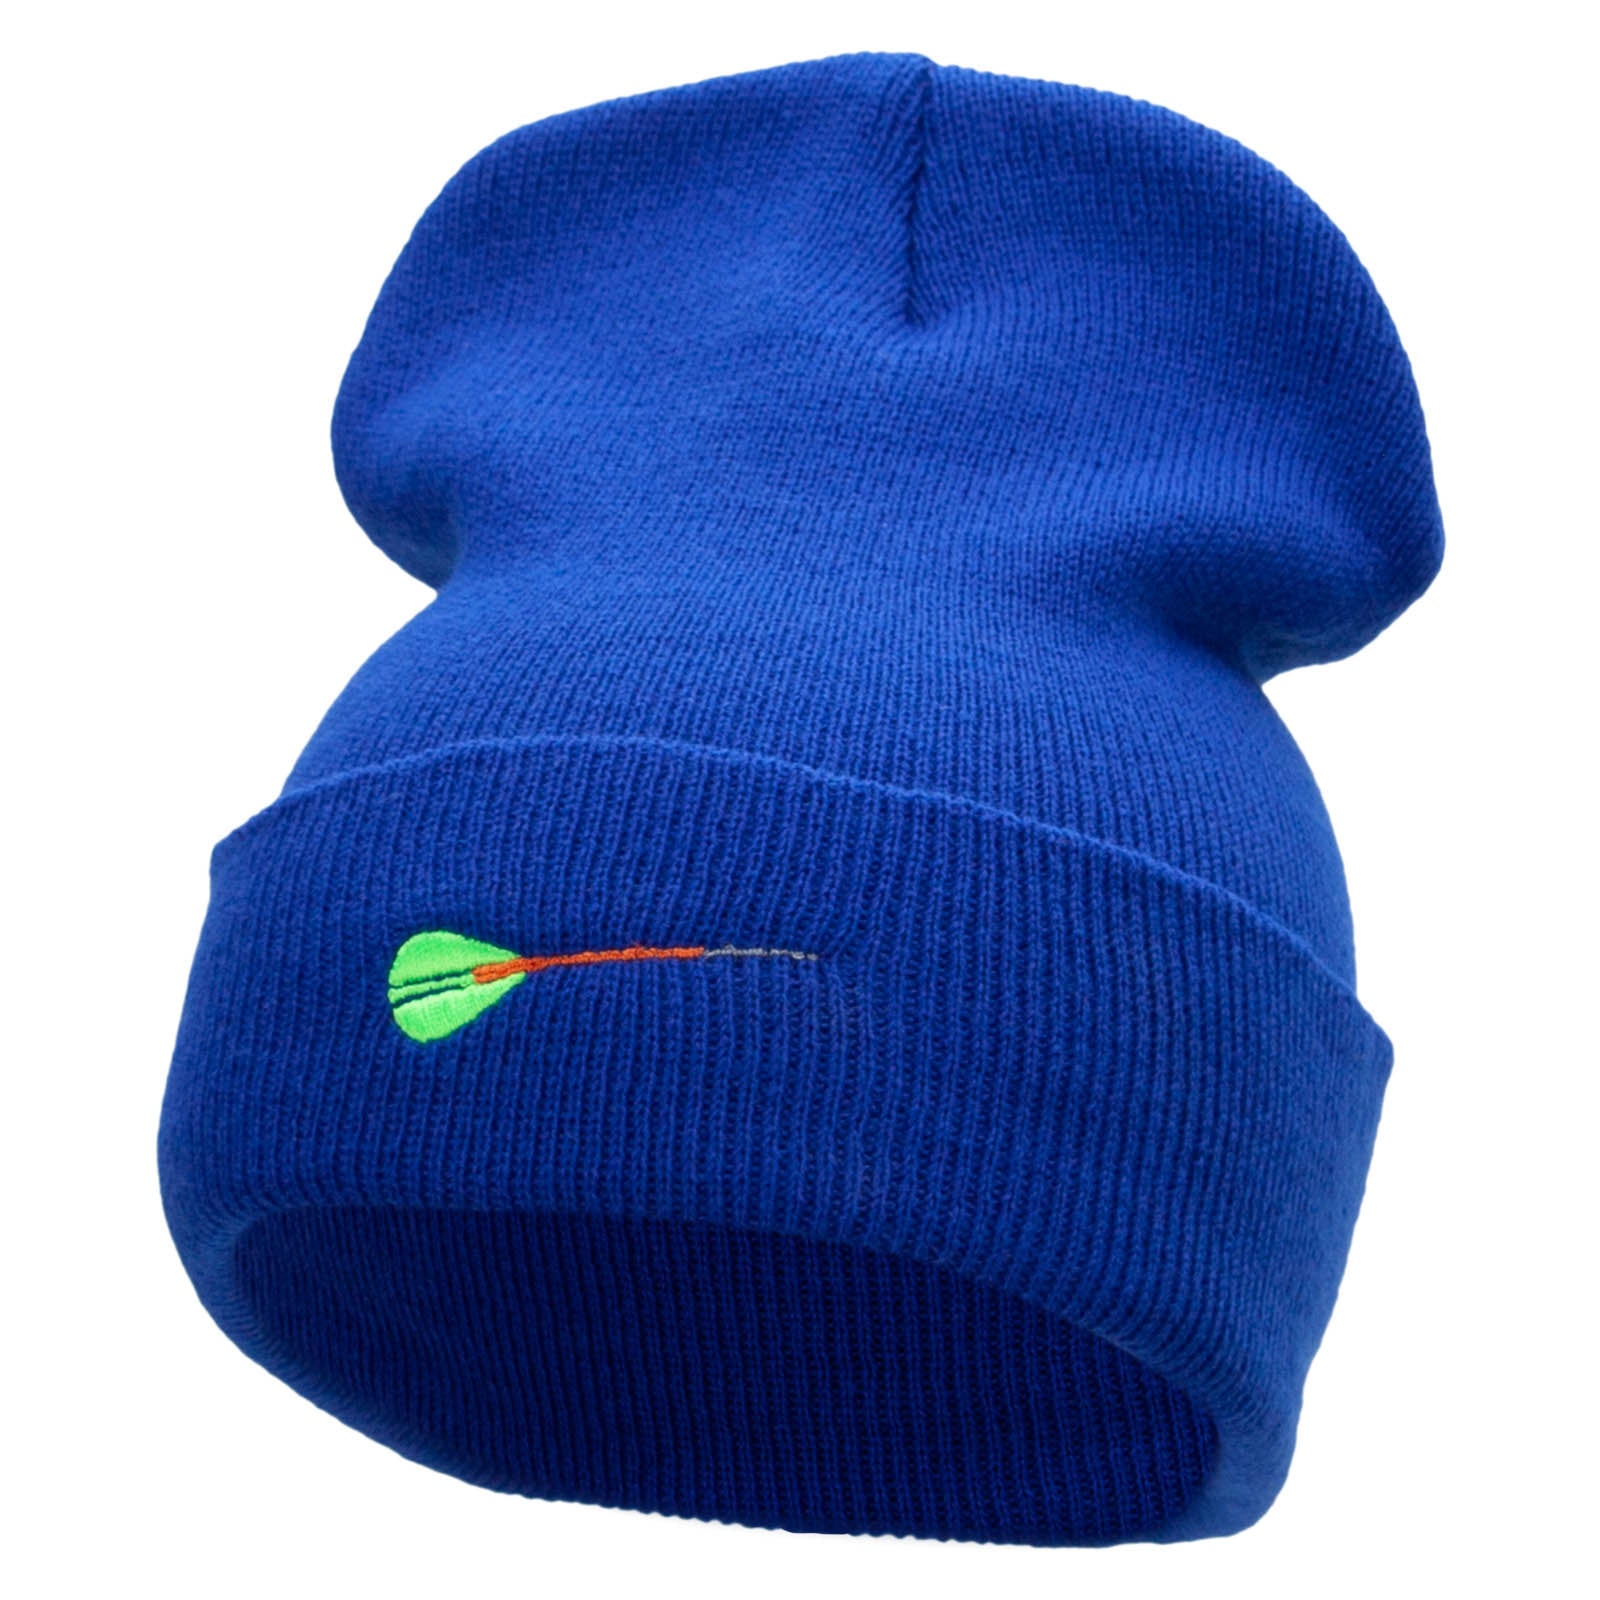 The Dart Embroidered 12 Inch Solid Long Beanie Made in USA - Royal OSFM